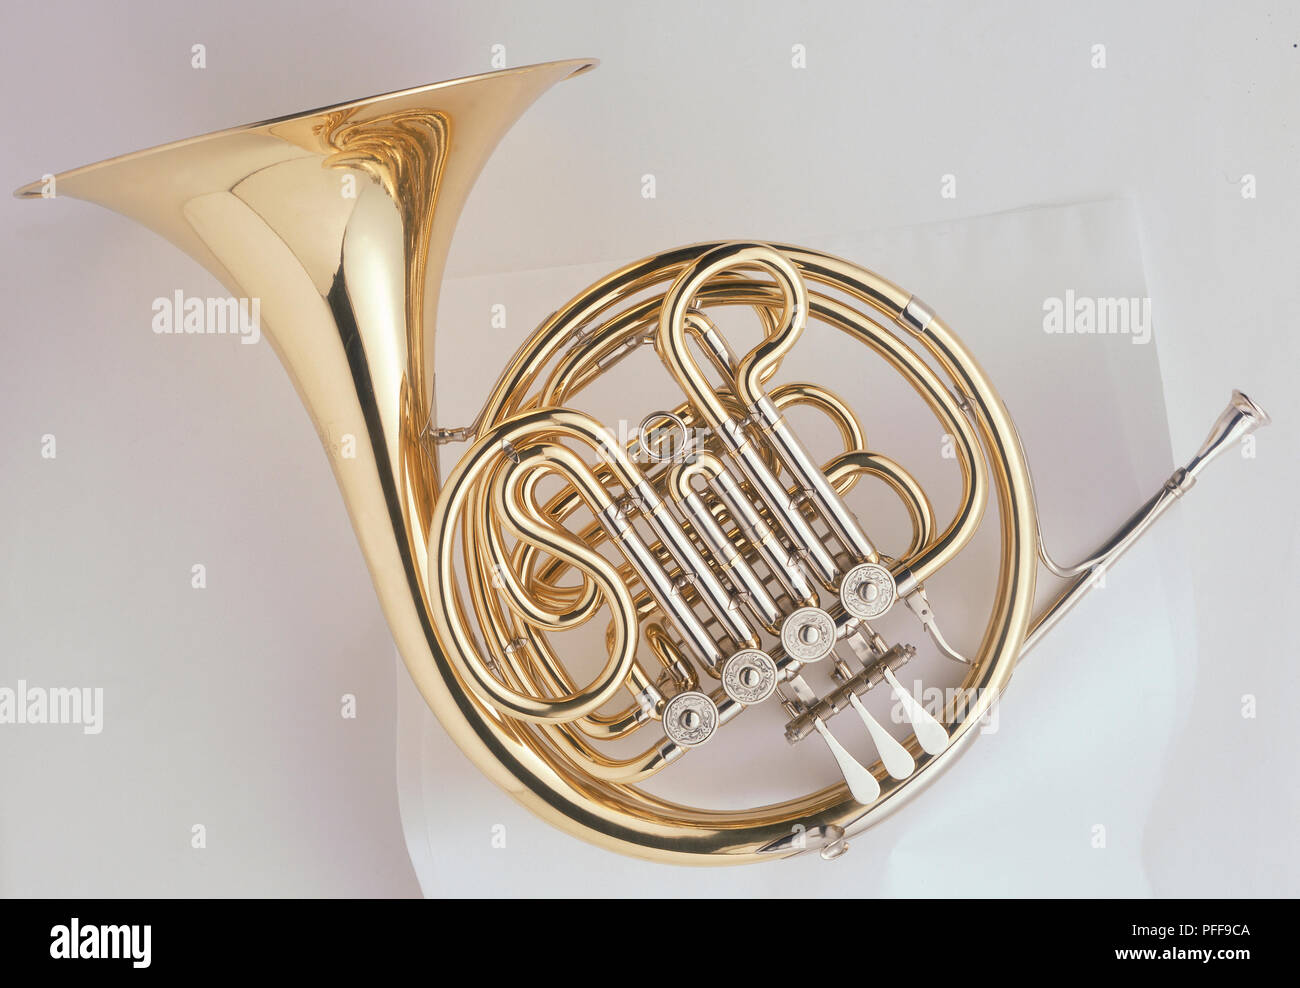 French Horn with large, flared bell, left view. Stock Photo